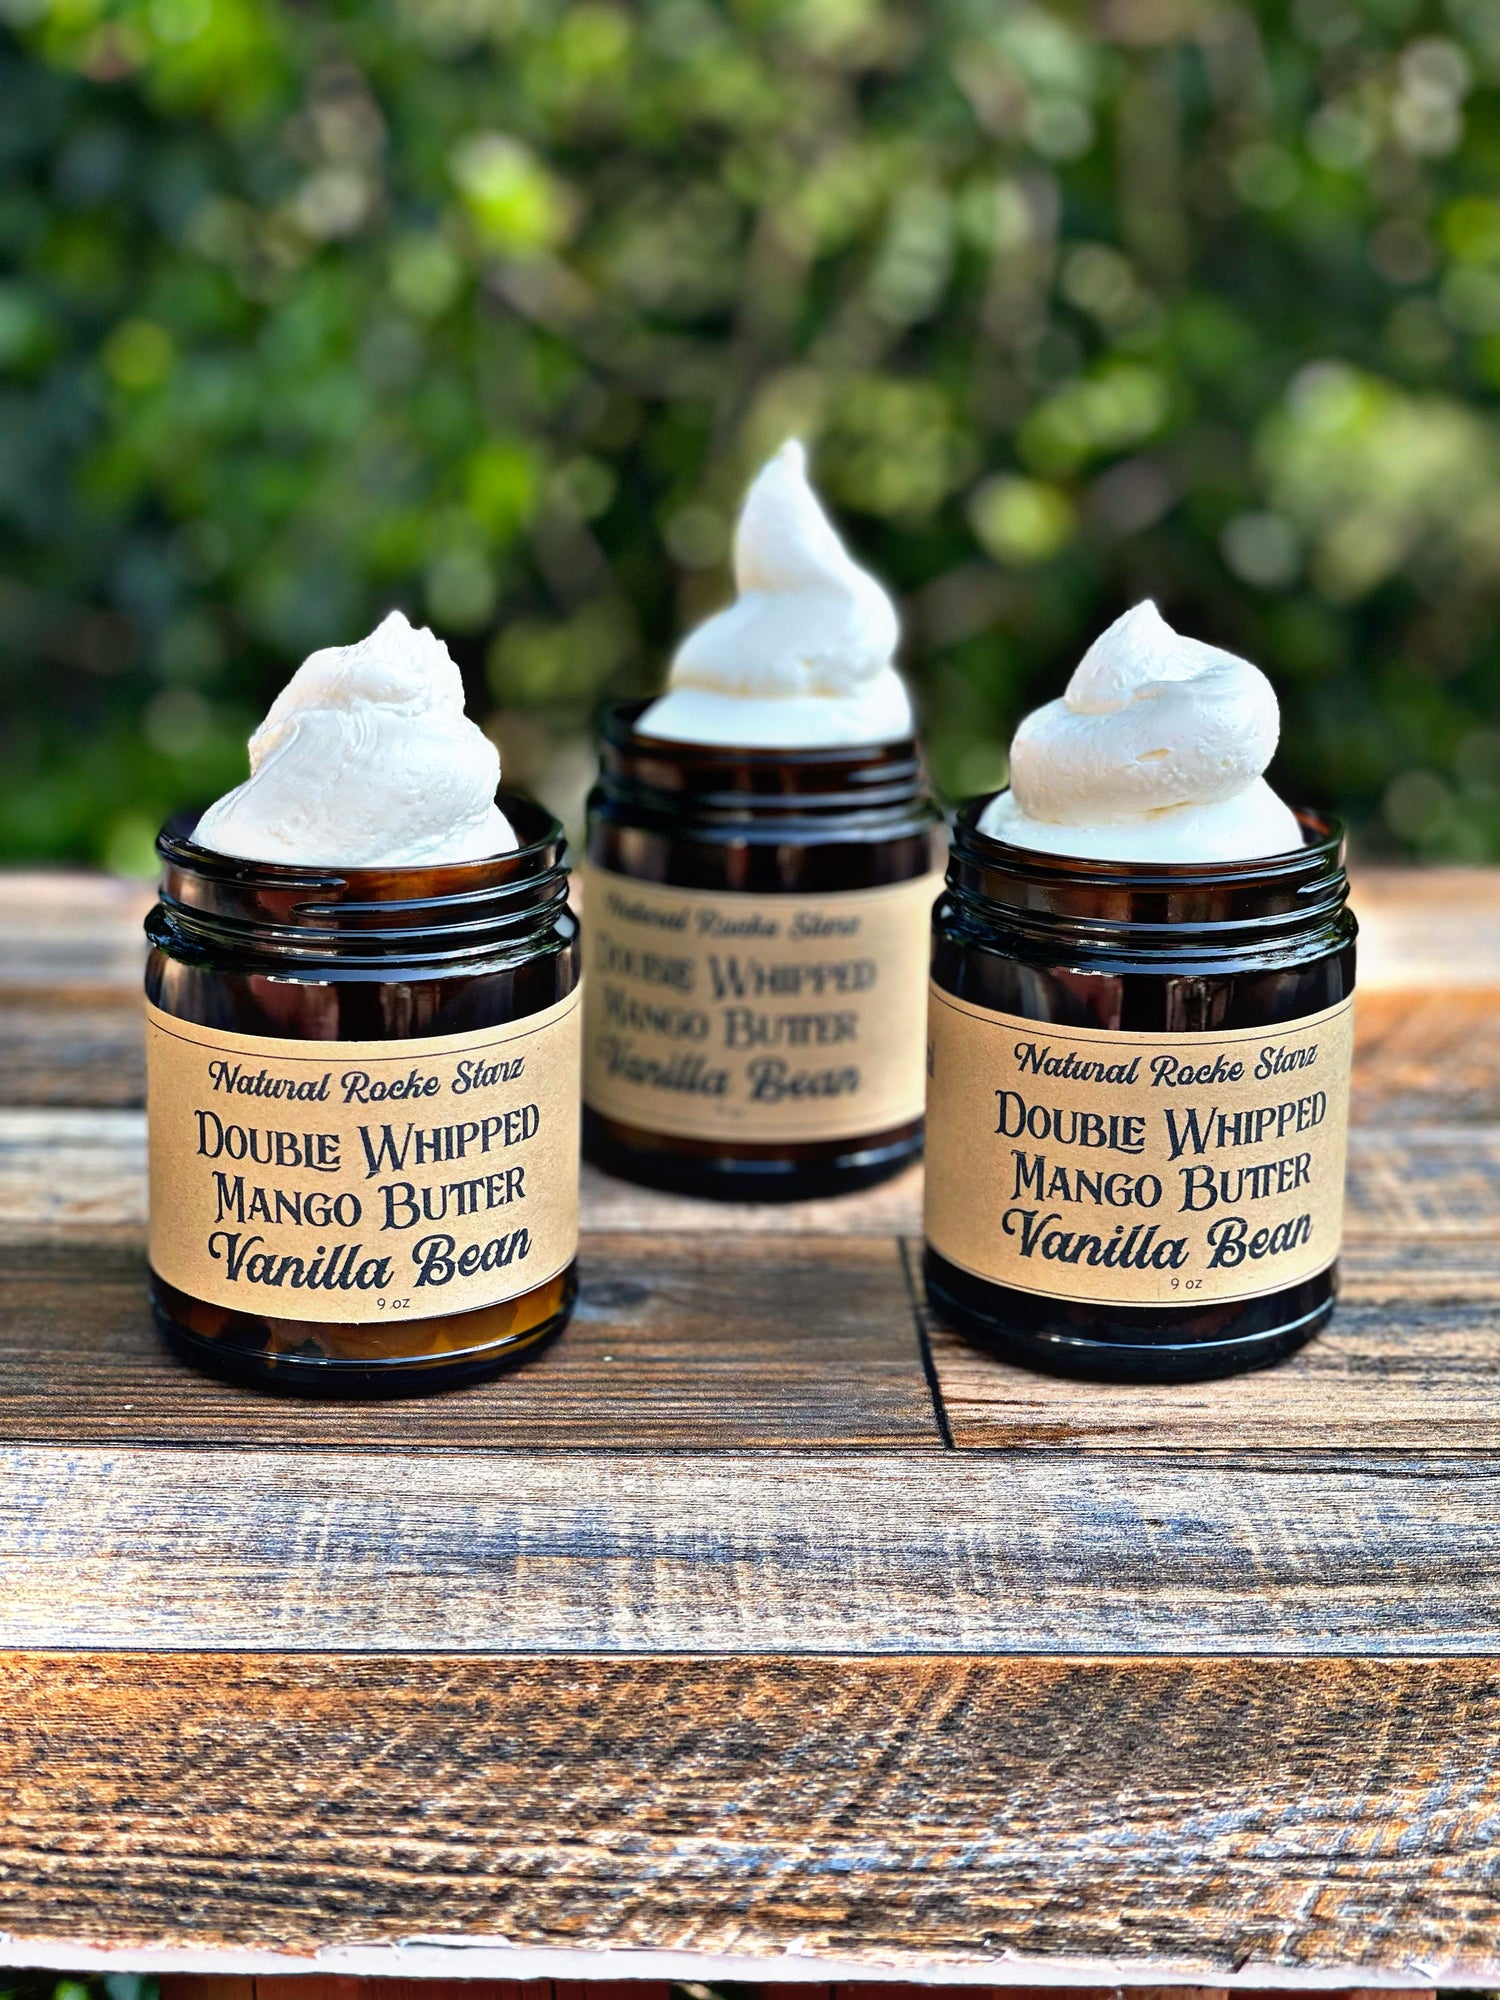 Doubled Whipped Mango Body Butters